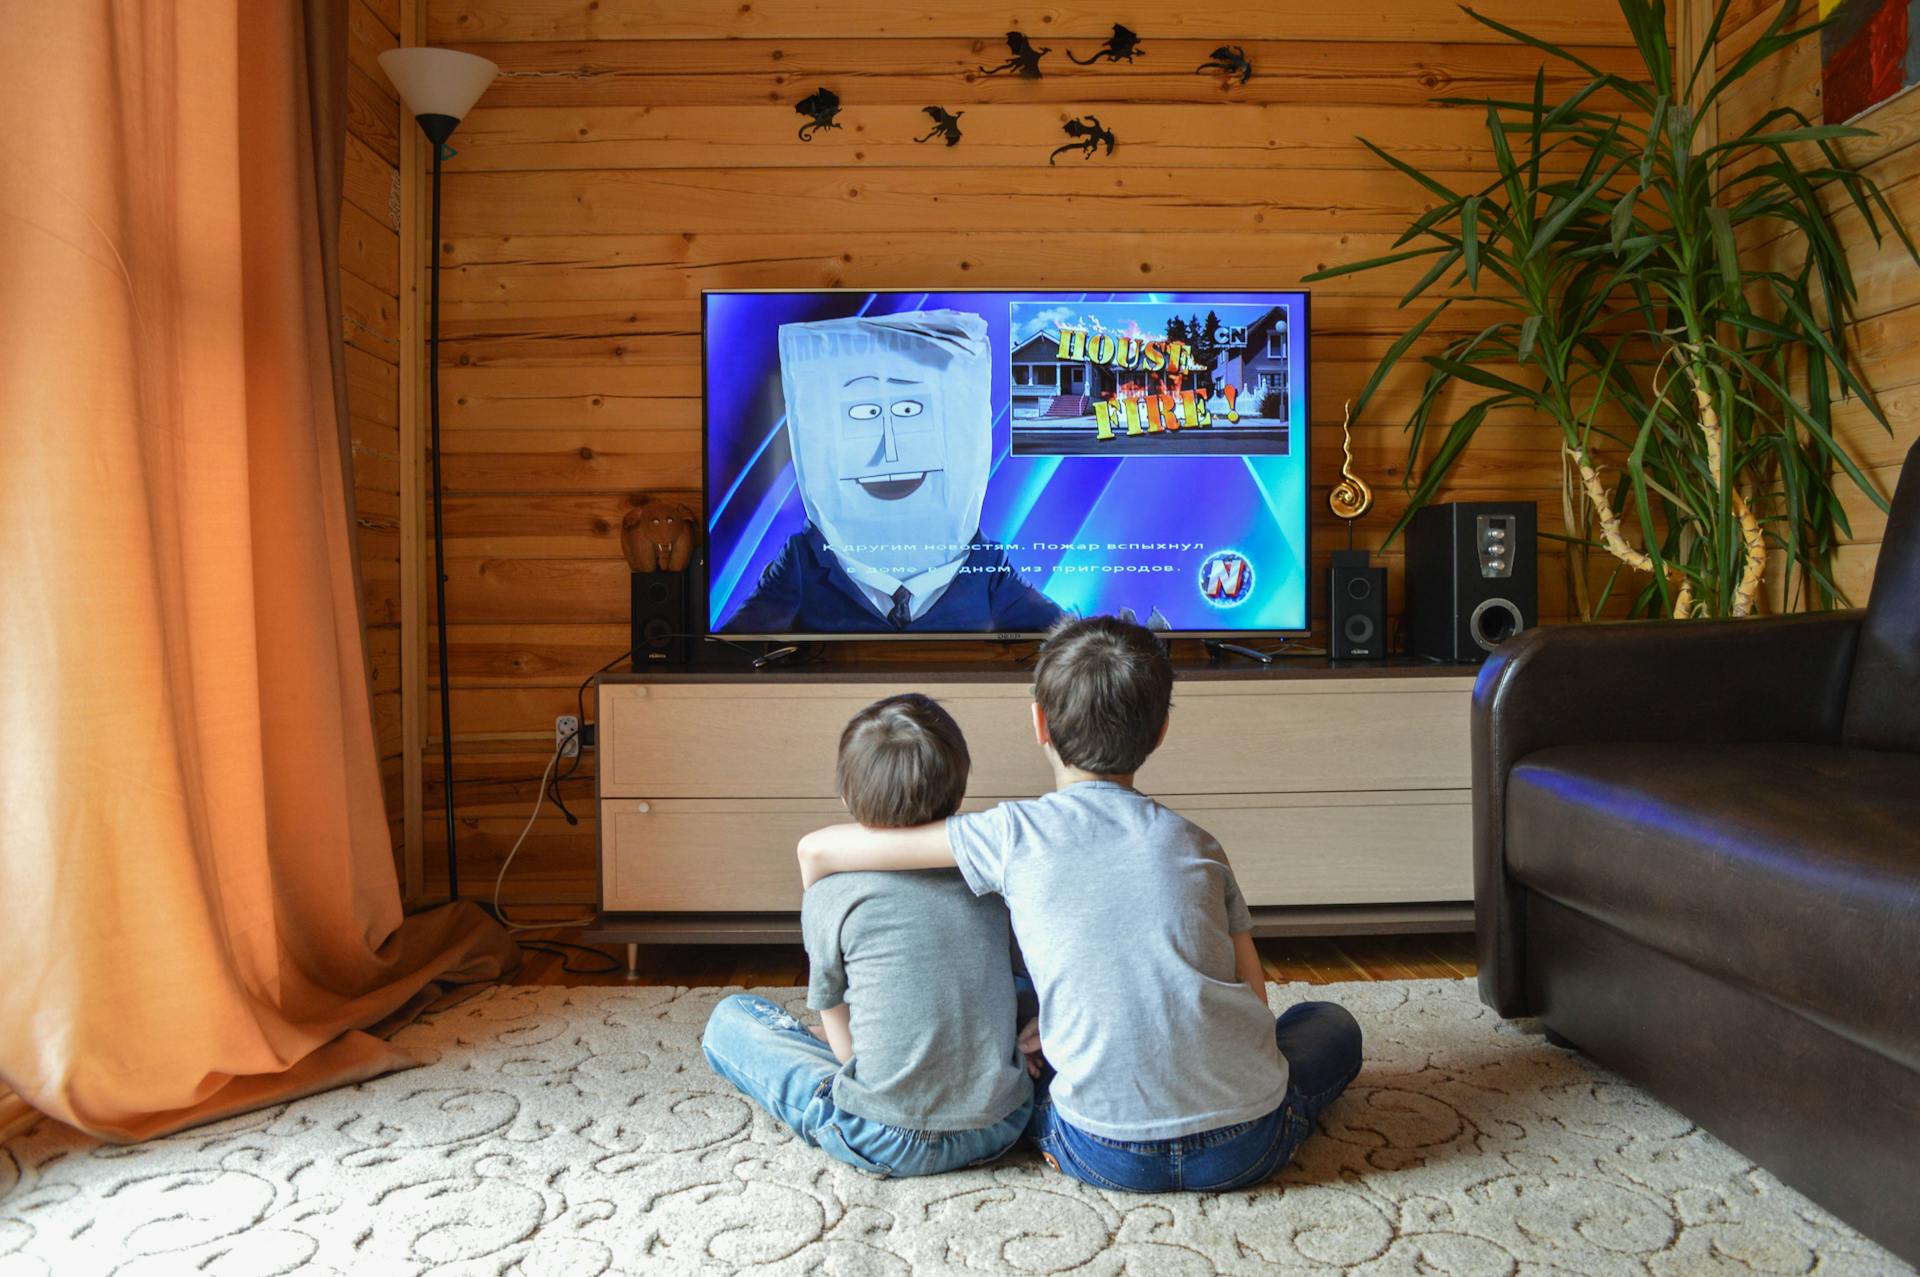 Two brothers hug and watch tv together.